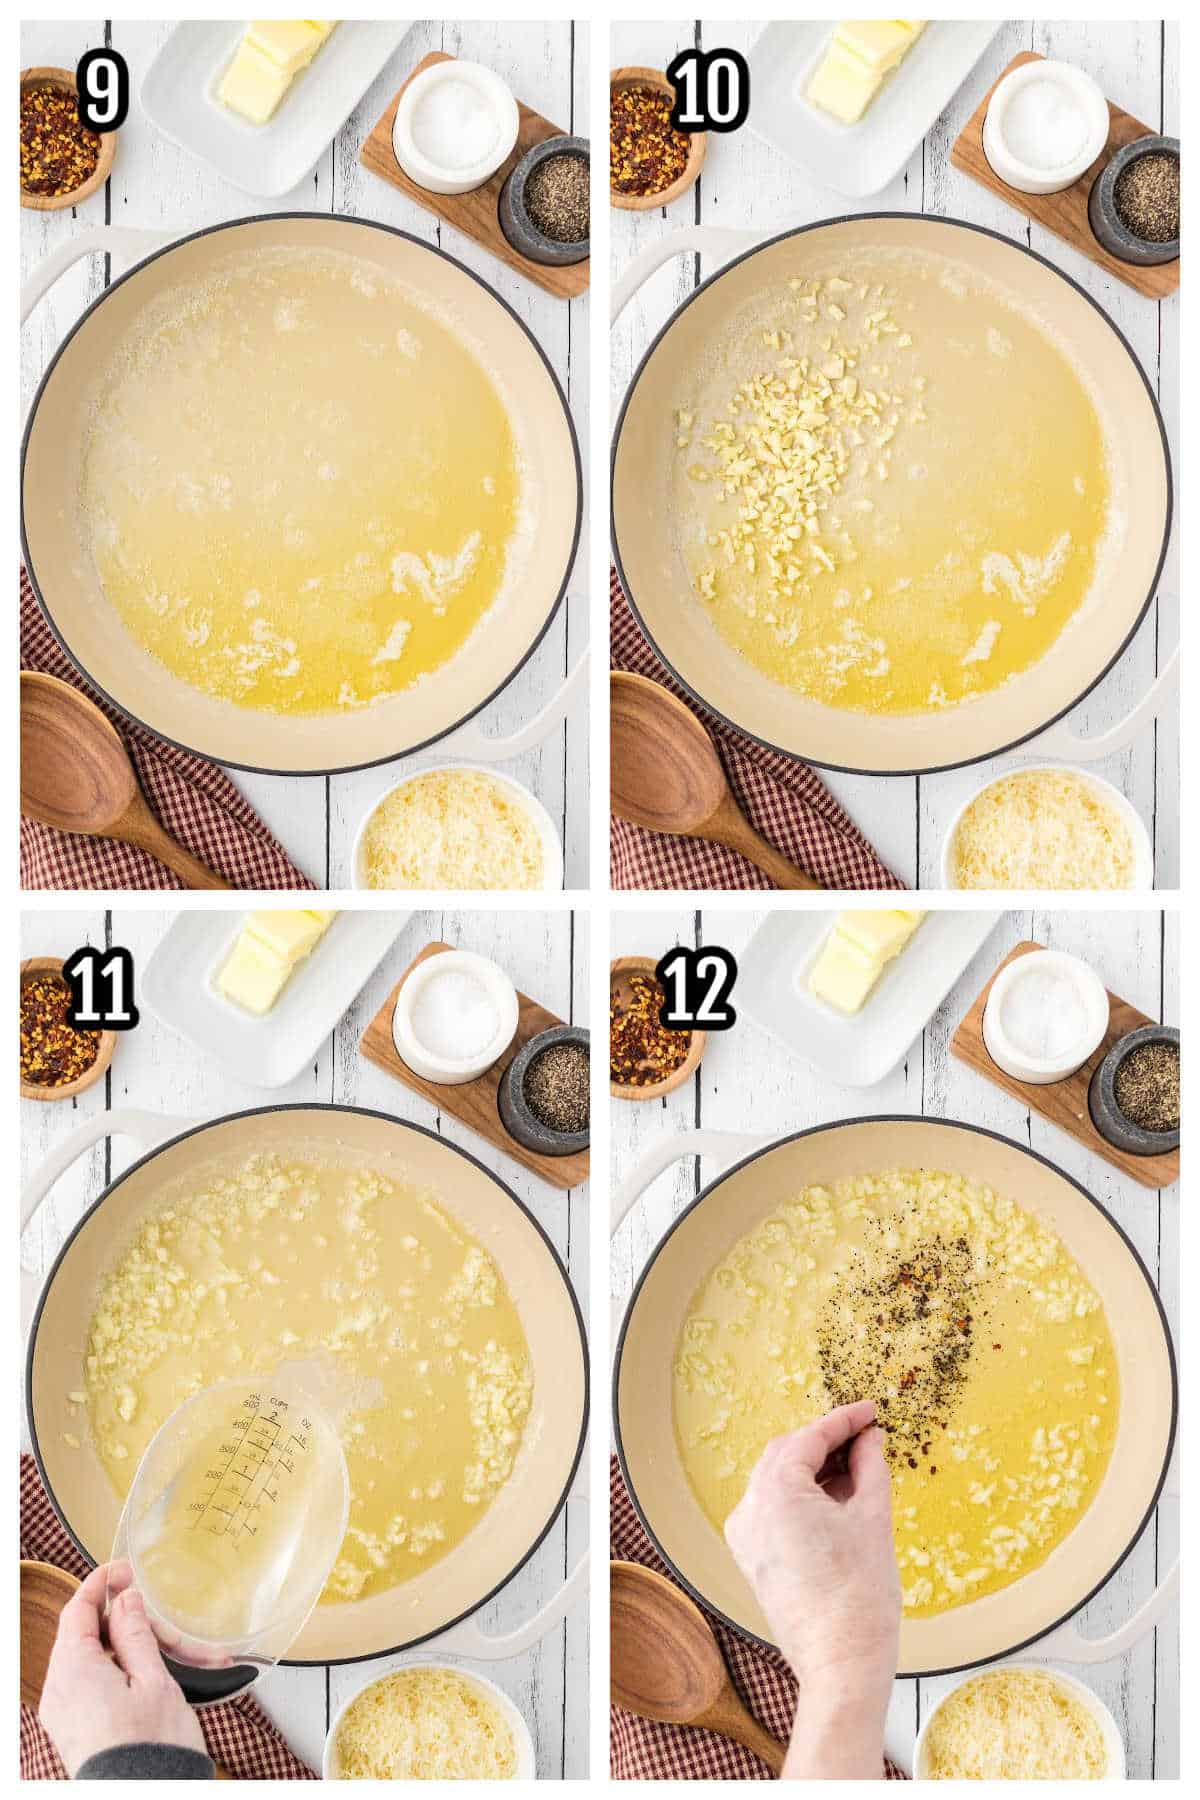 The third collage features the steps to making the butter garlic sauce. 